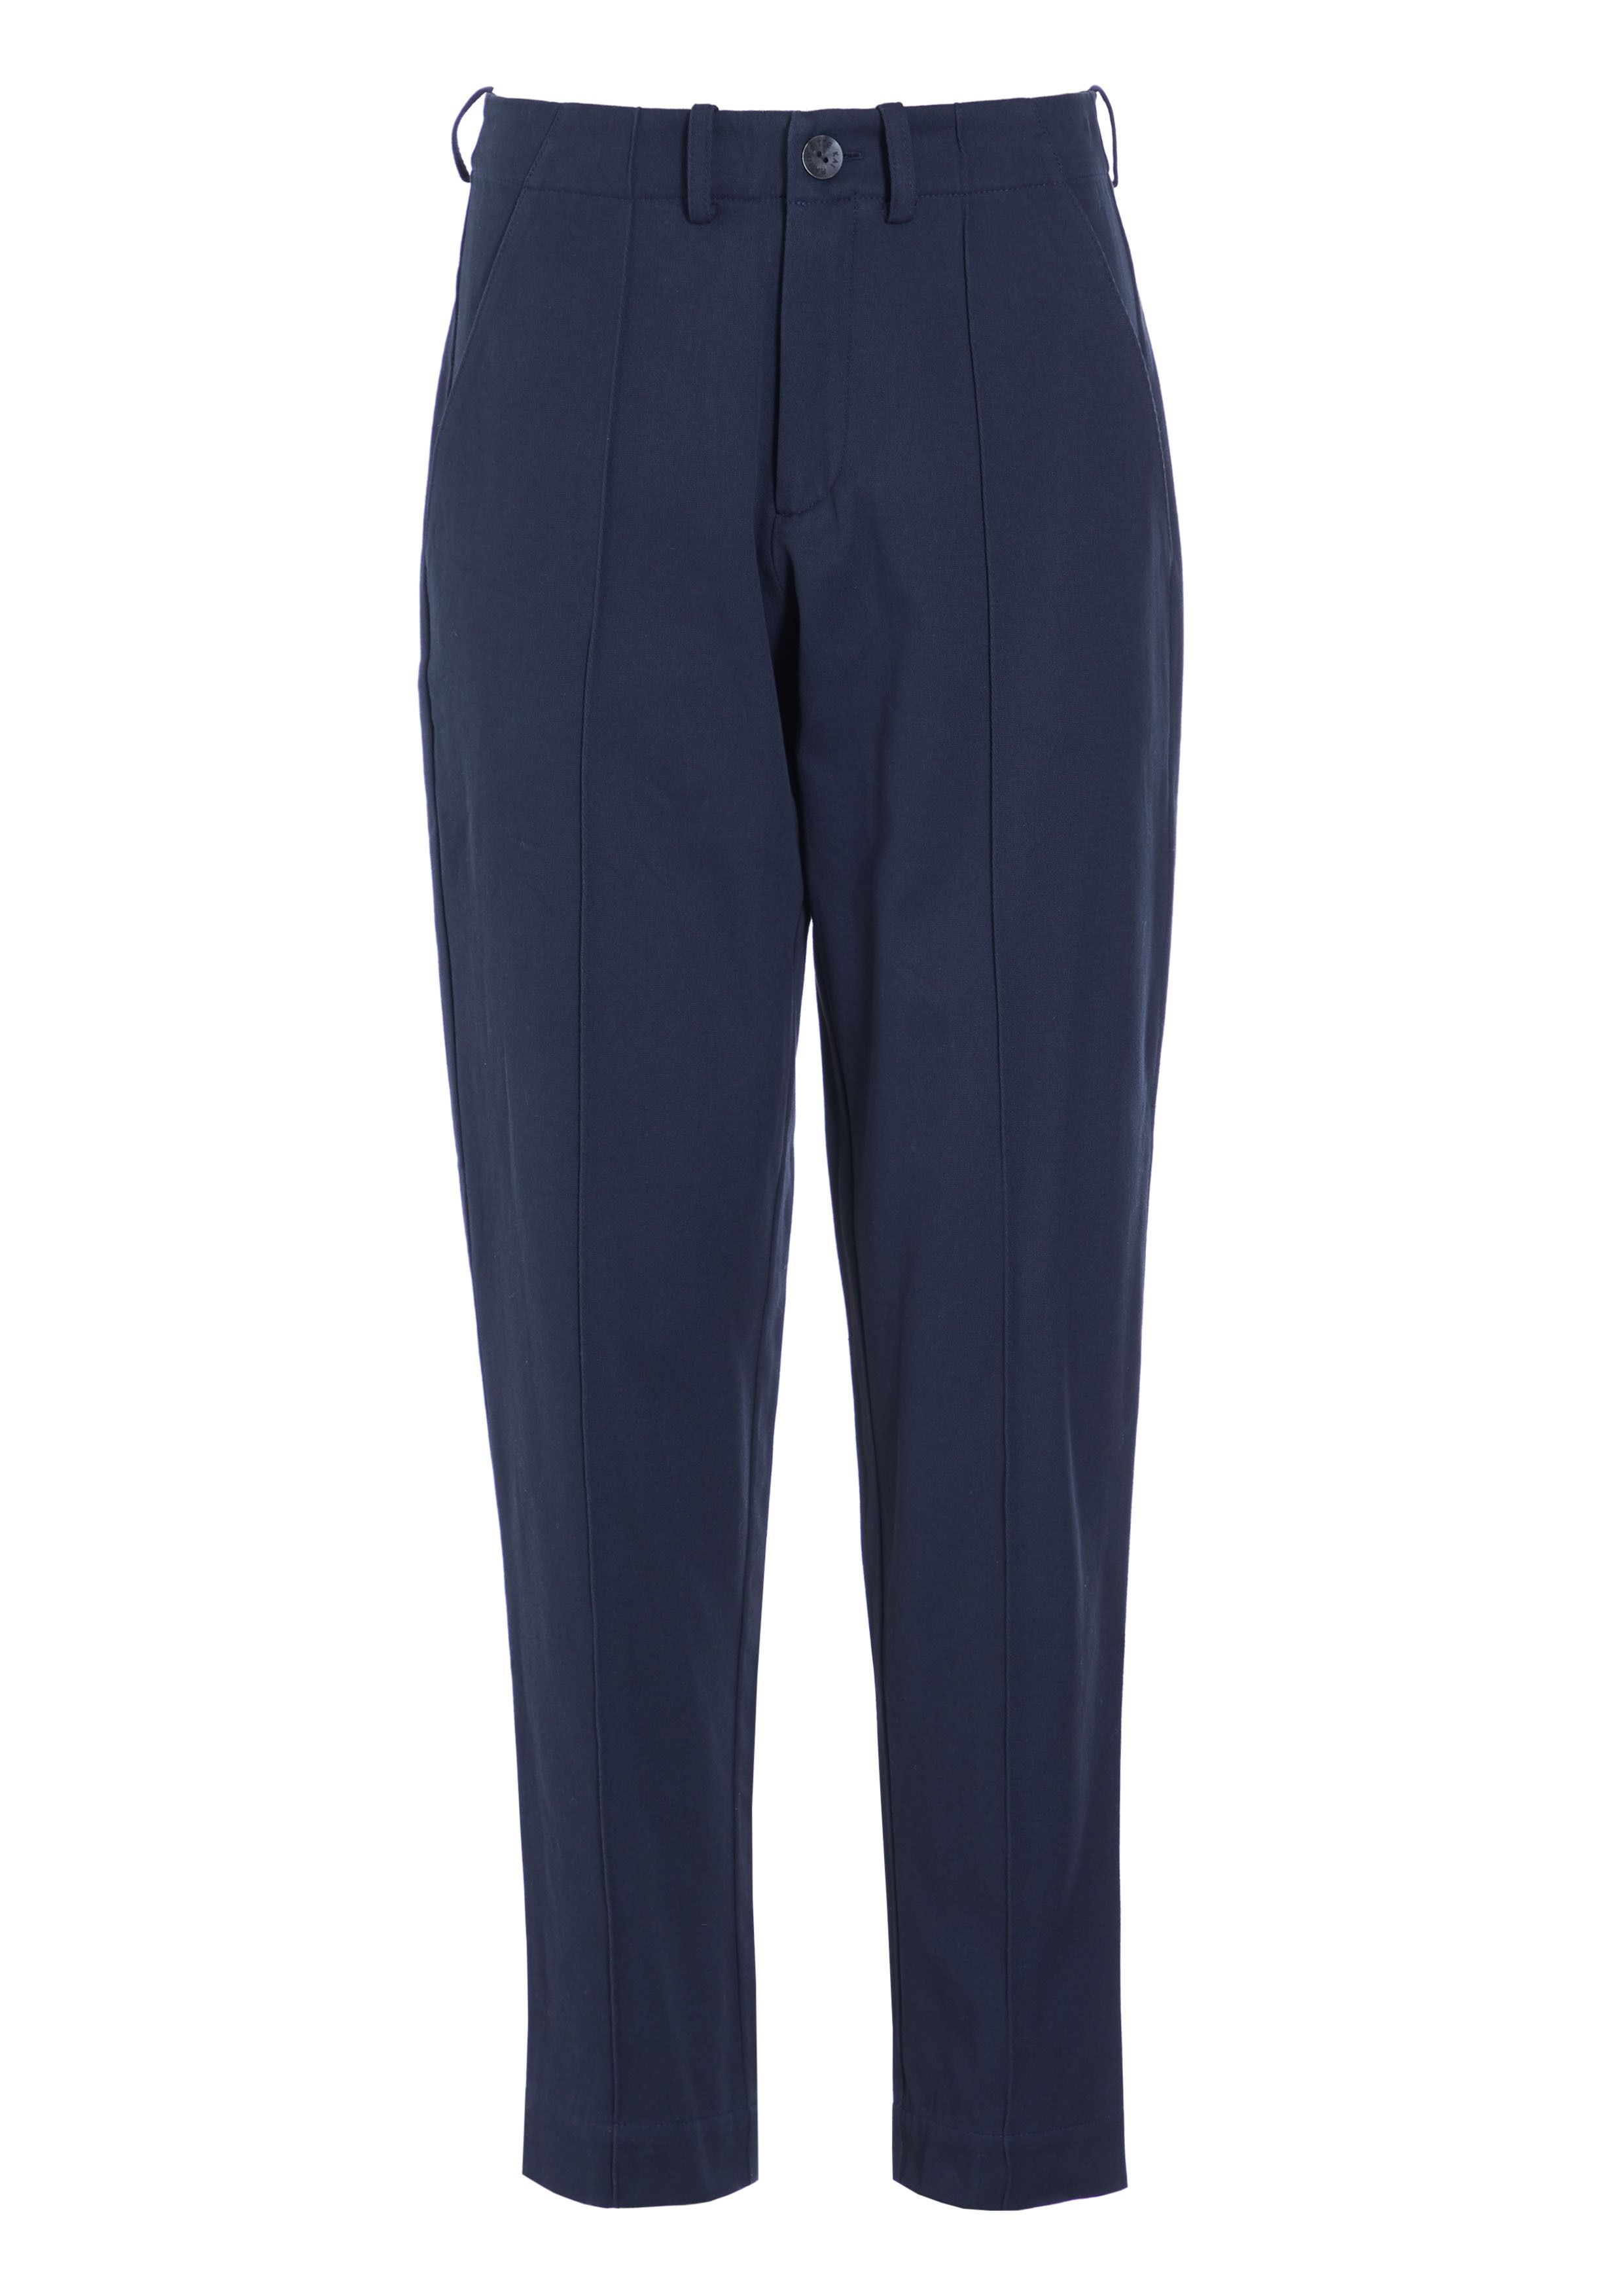 GARCON TWILL TROUSERS WITH PLEATS